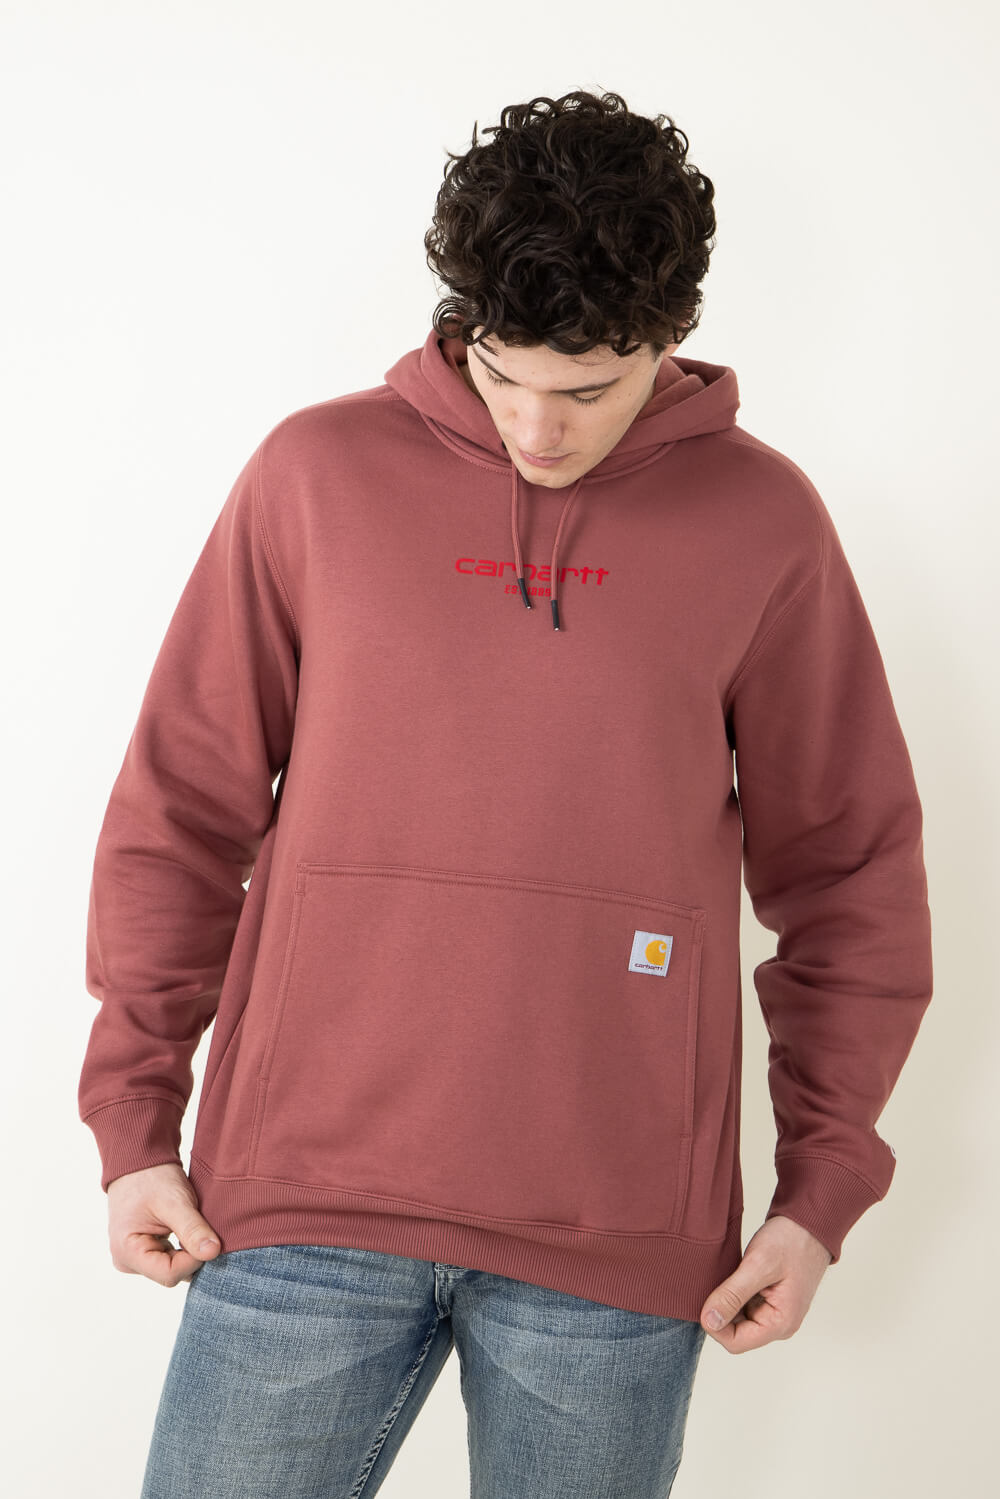 Carhartt Force Relaxed Fit Lightweight Logo Graphic Hoodie for Men